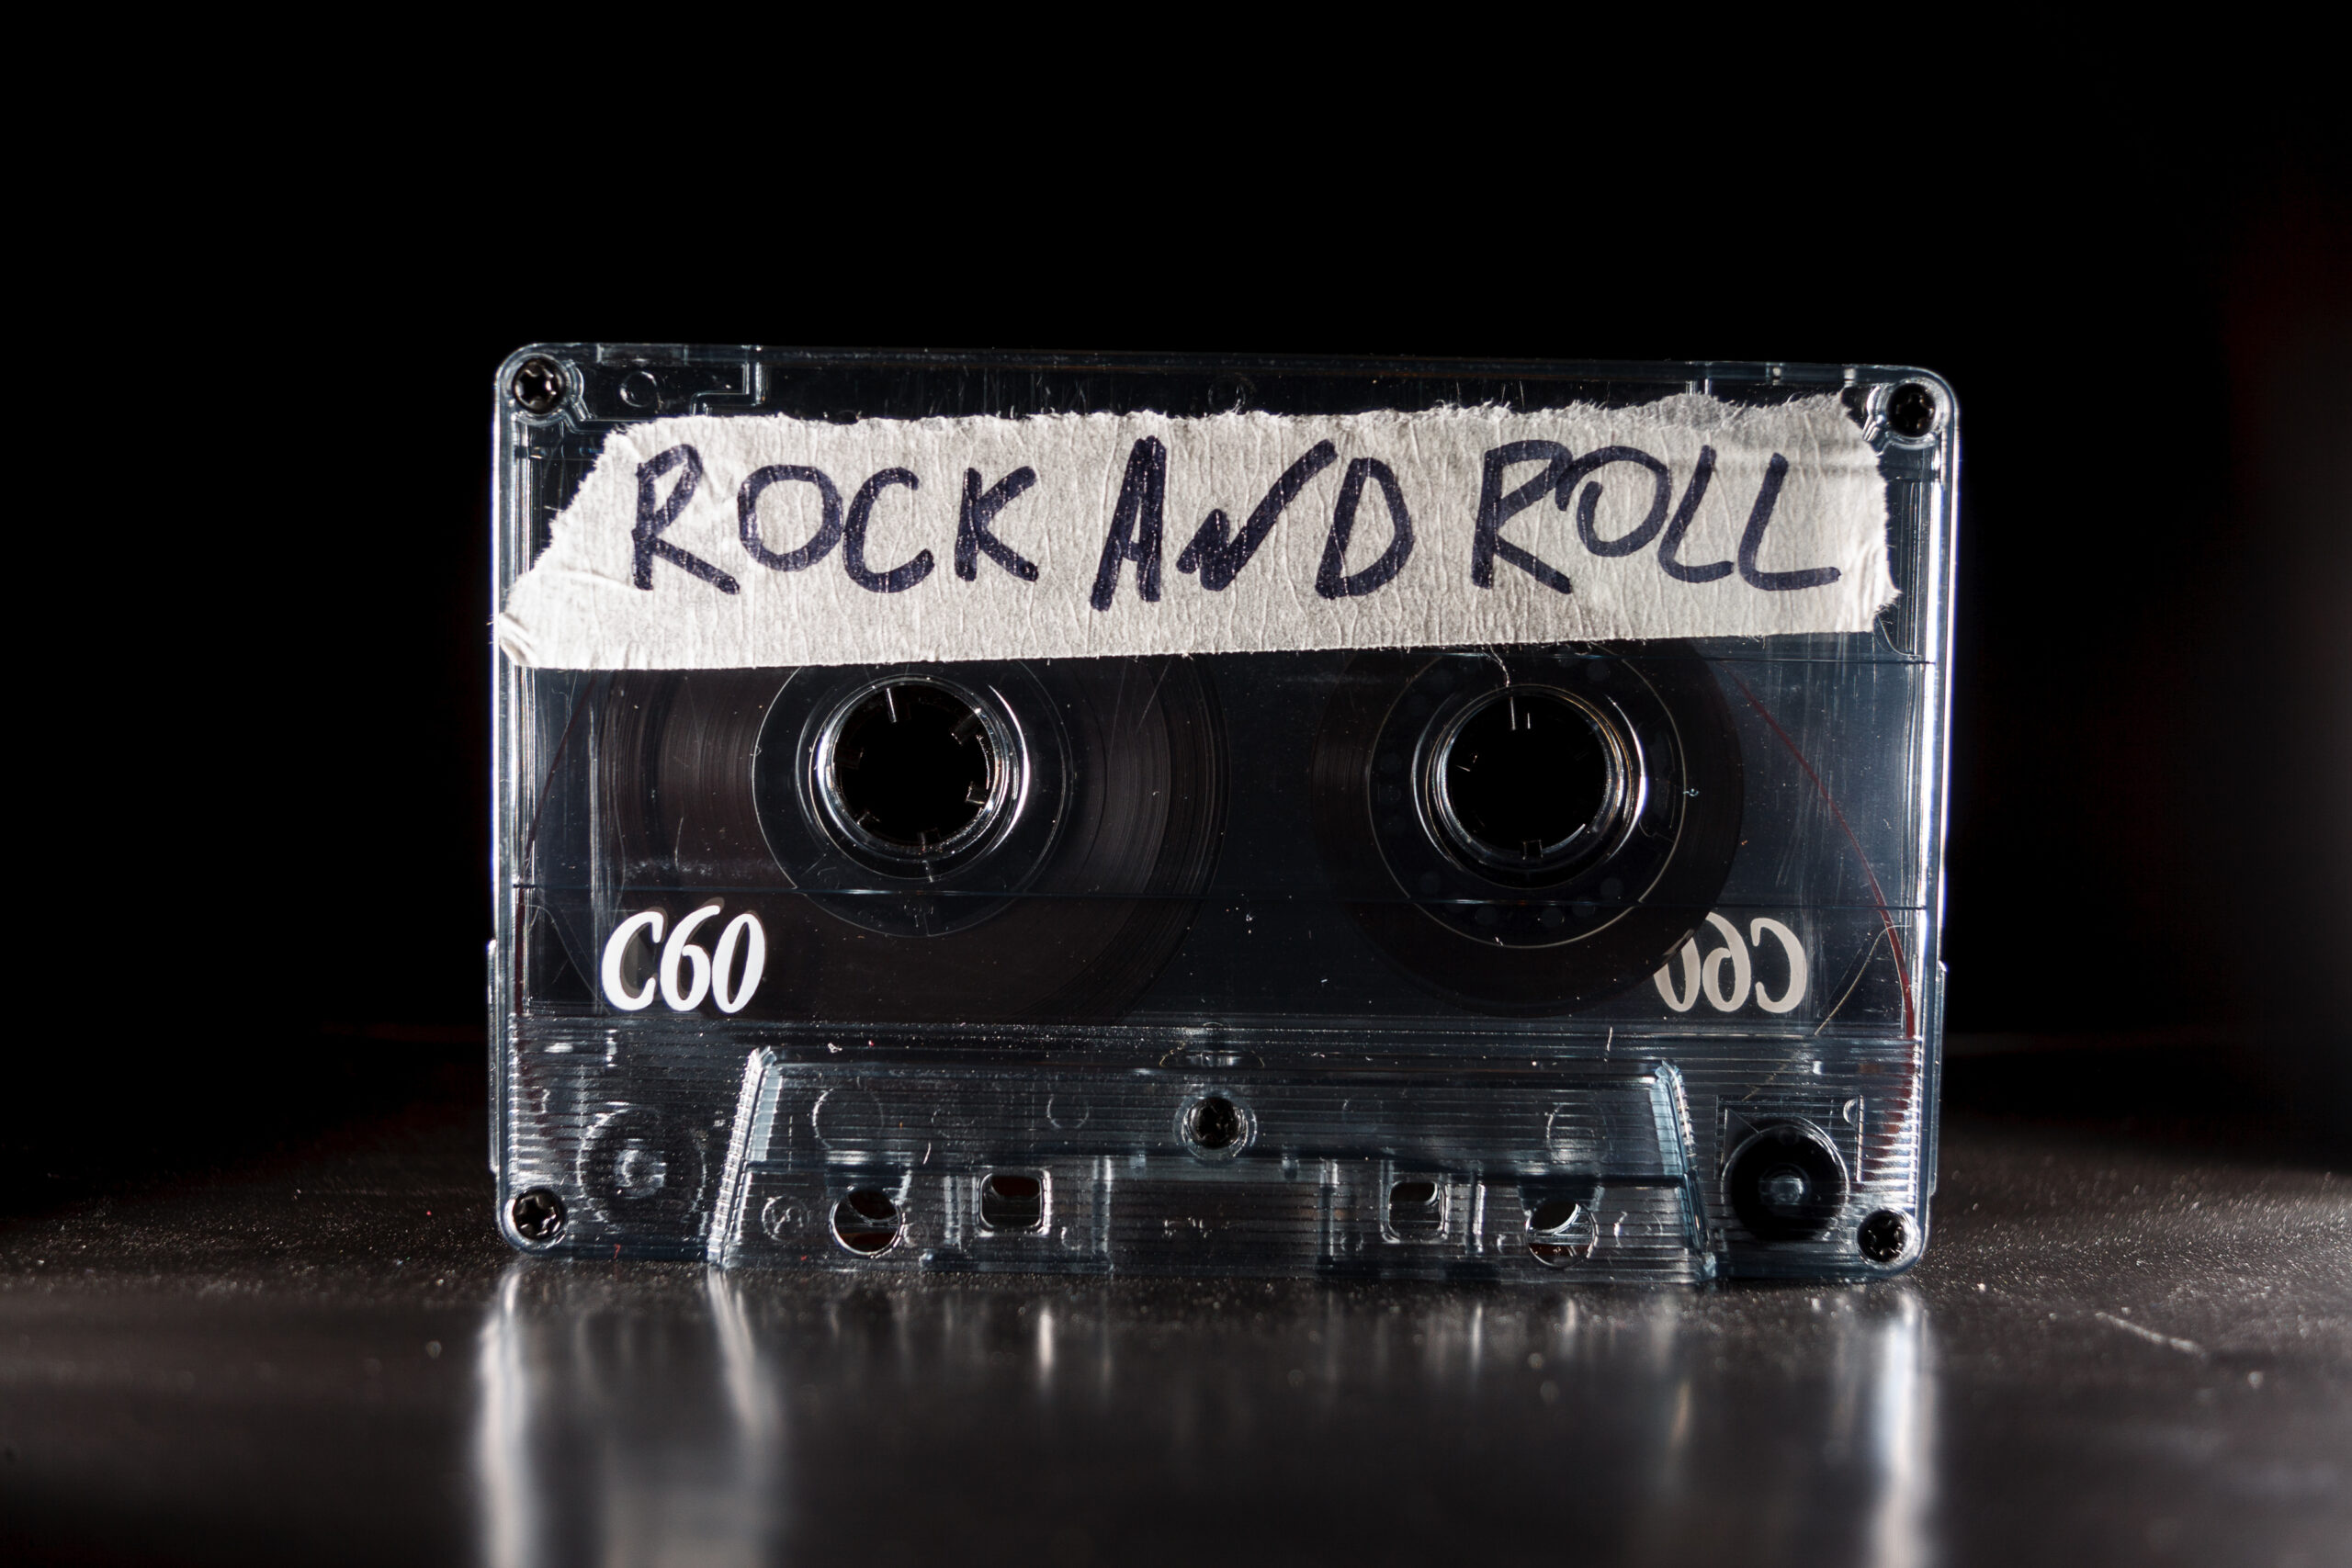 a casette player with "rock and roll" written on tape to label it